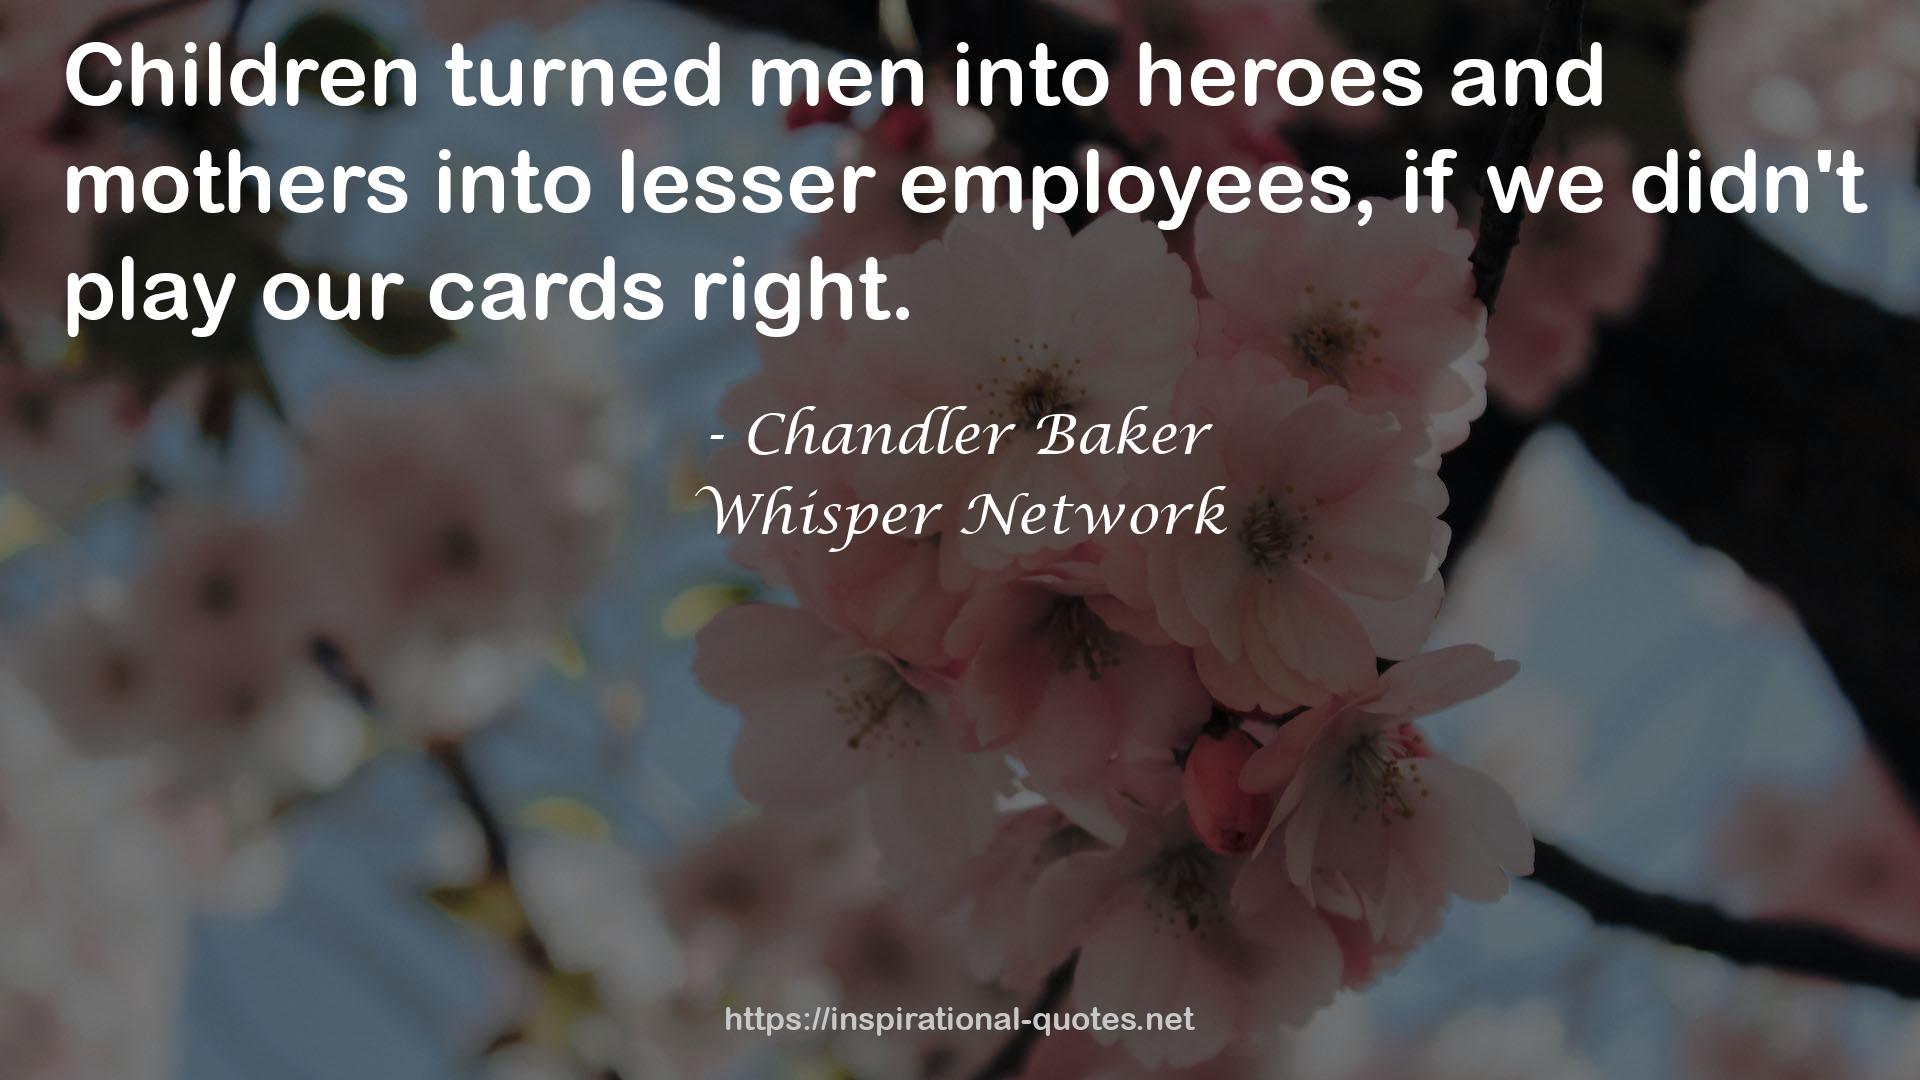 Chandler Baker QUOTES